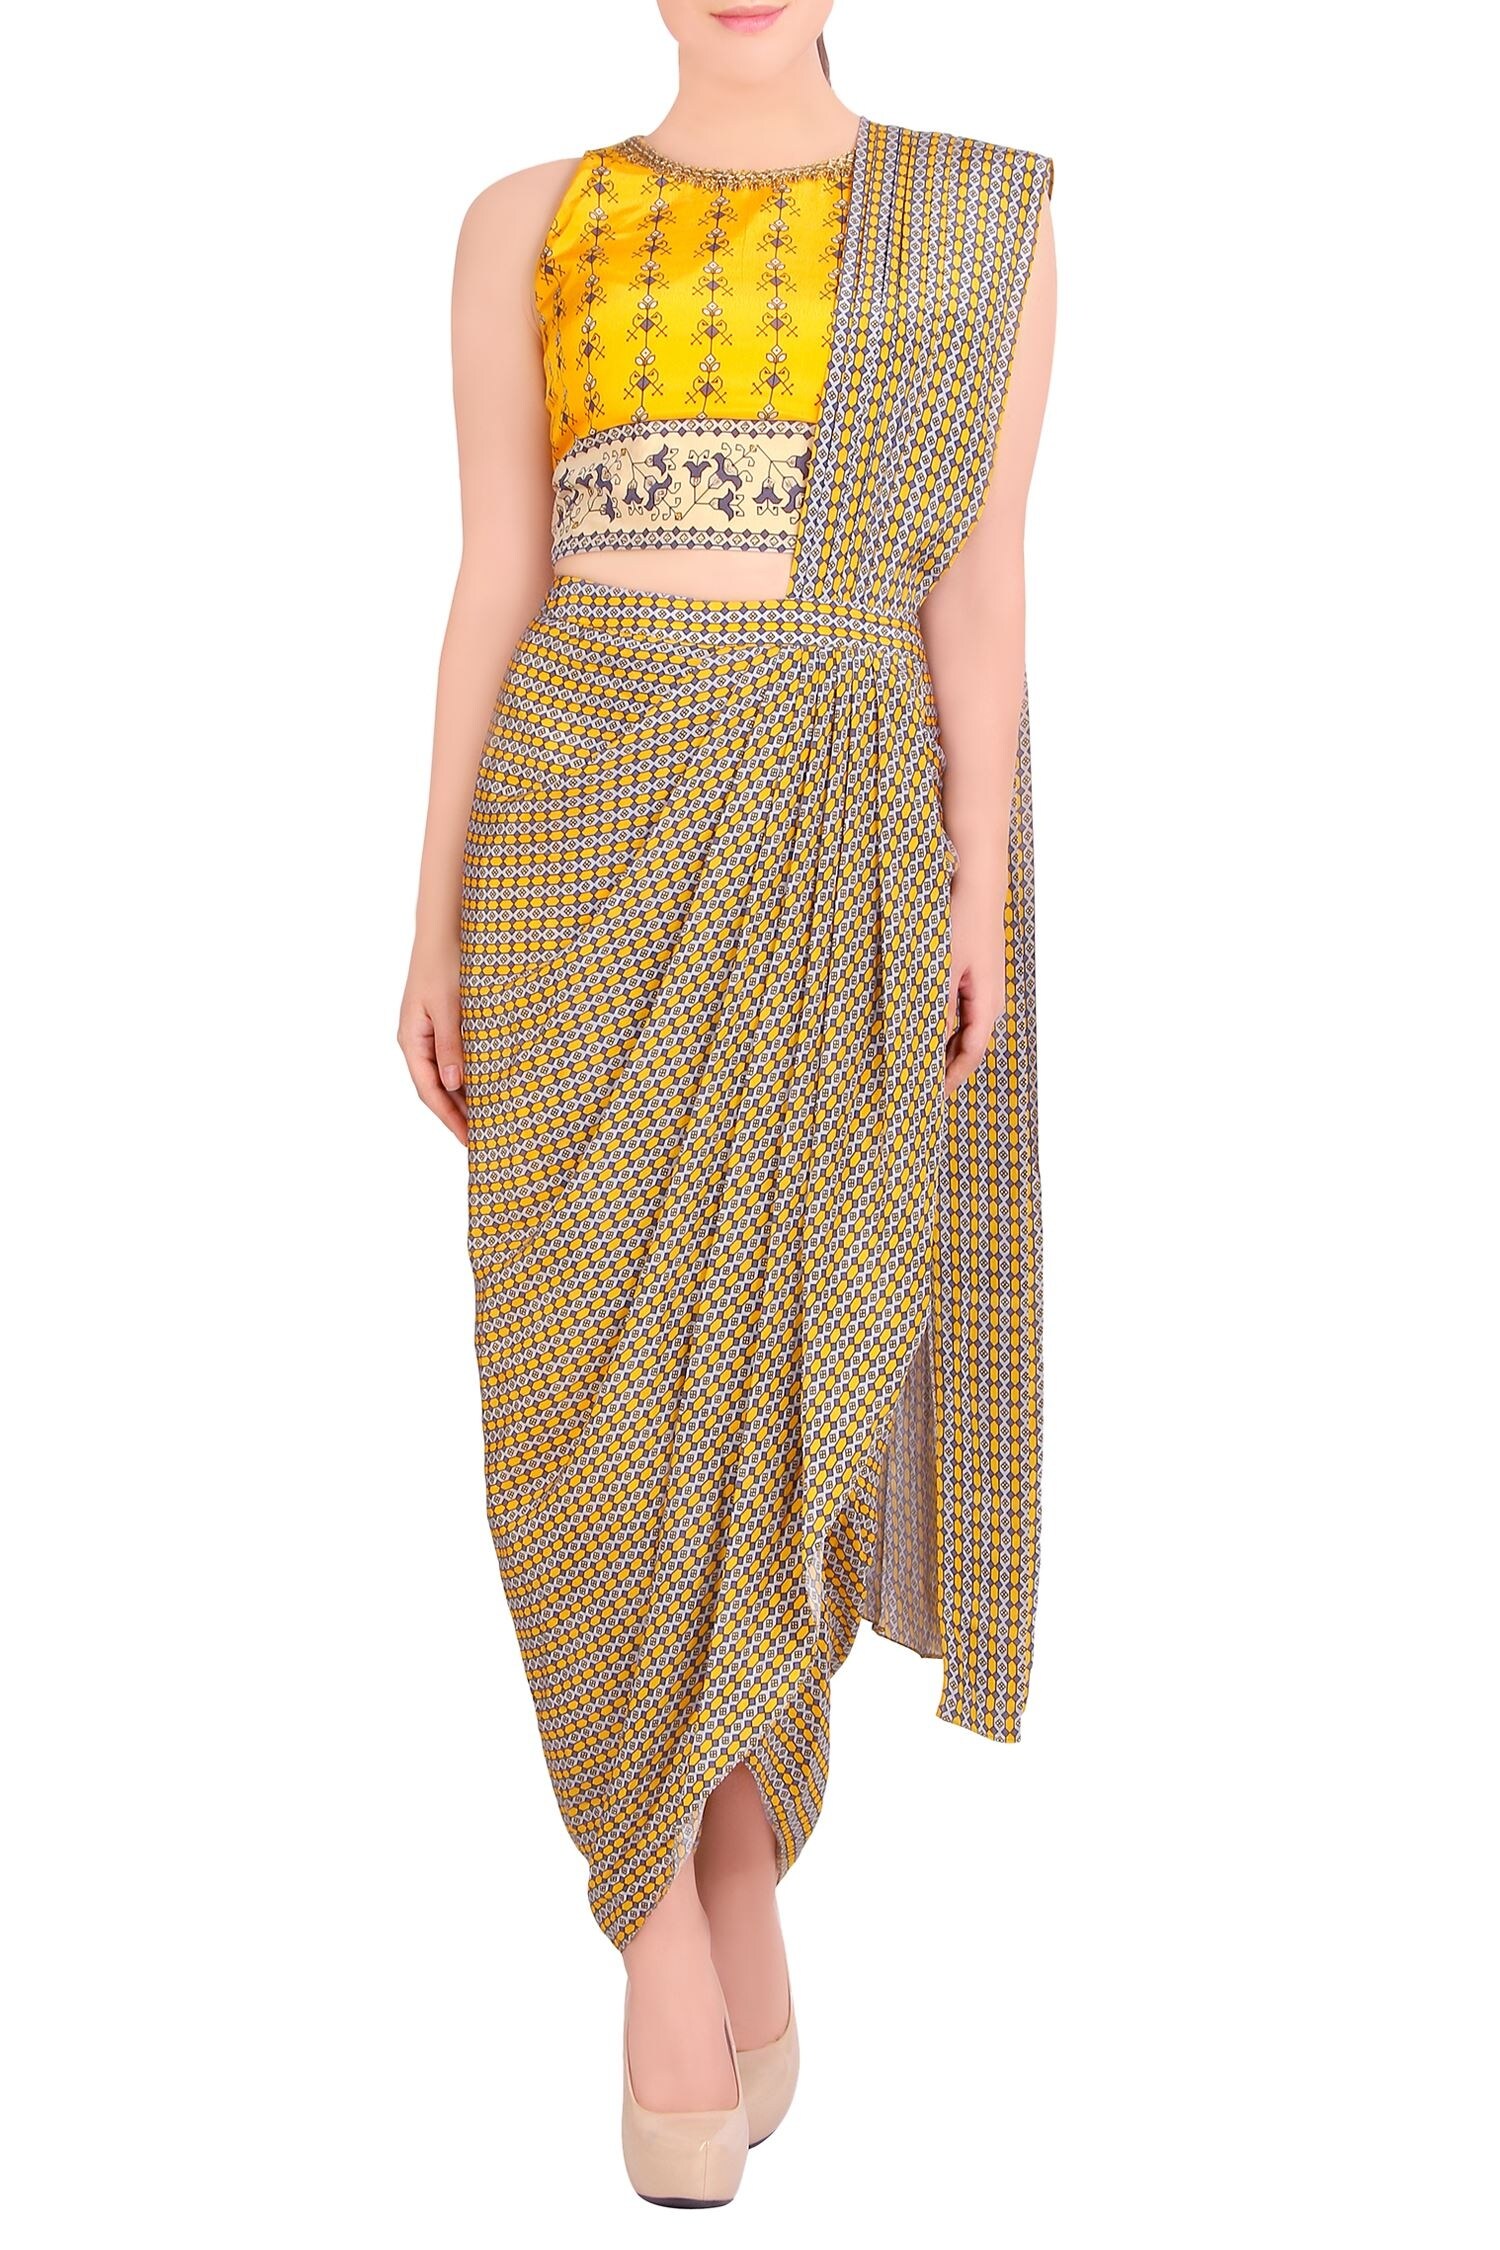 Soup by Sougat Paul Yellow Printed Concept Saree With Blouse For Women